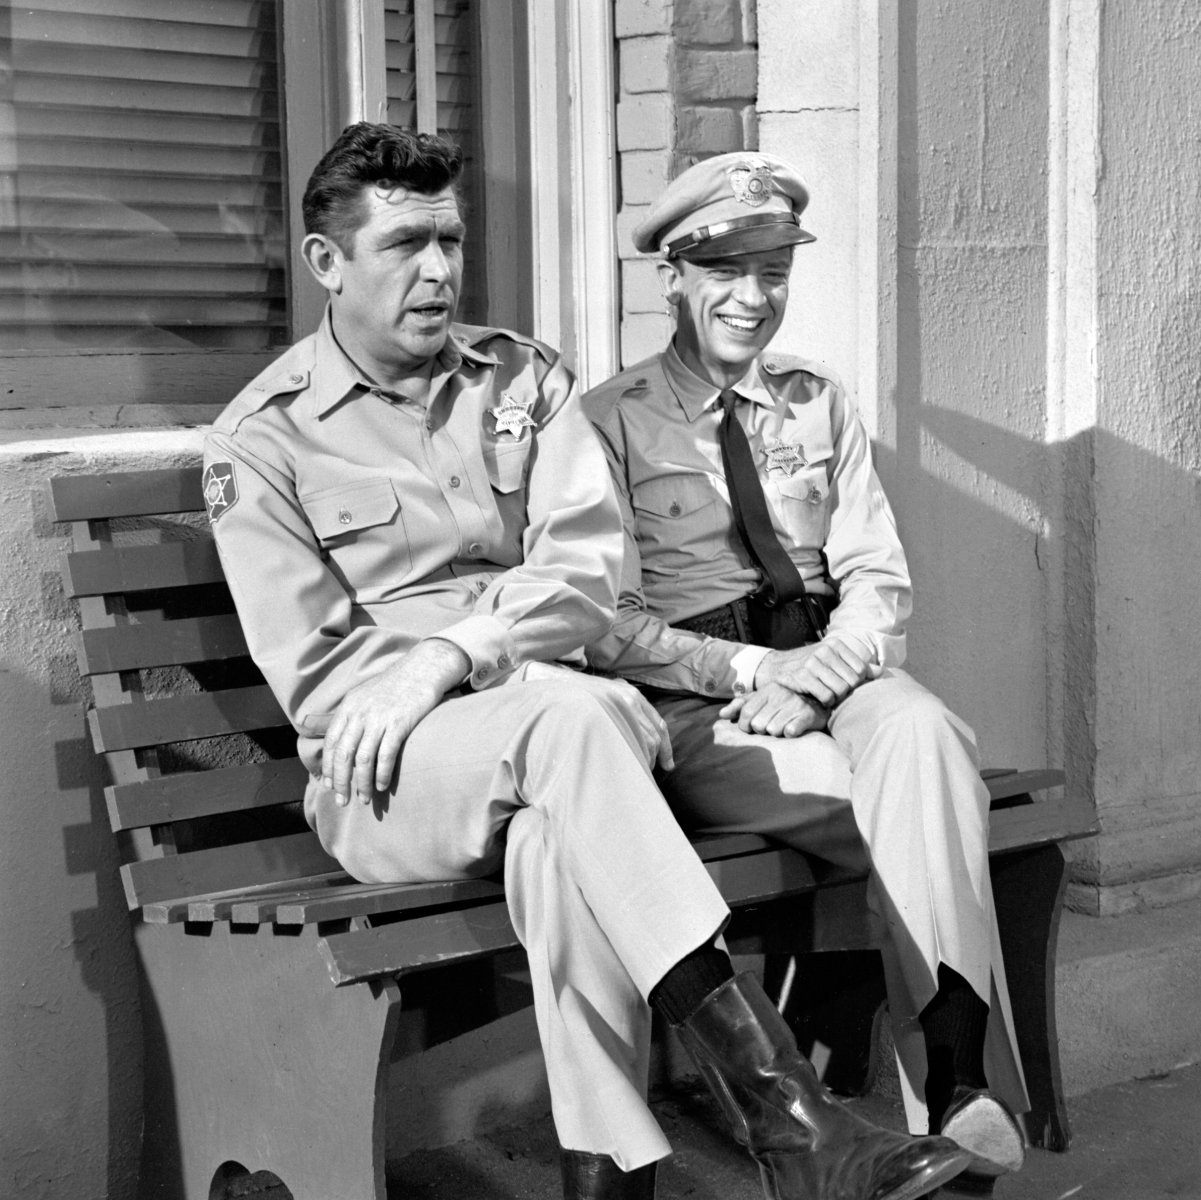 Andy Griffith and Don Knotts sit on a bench outside the Mayberry courthouse in 'The Andy Griffith Show'